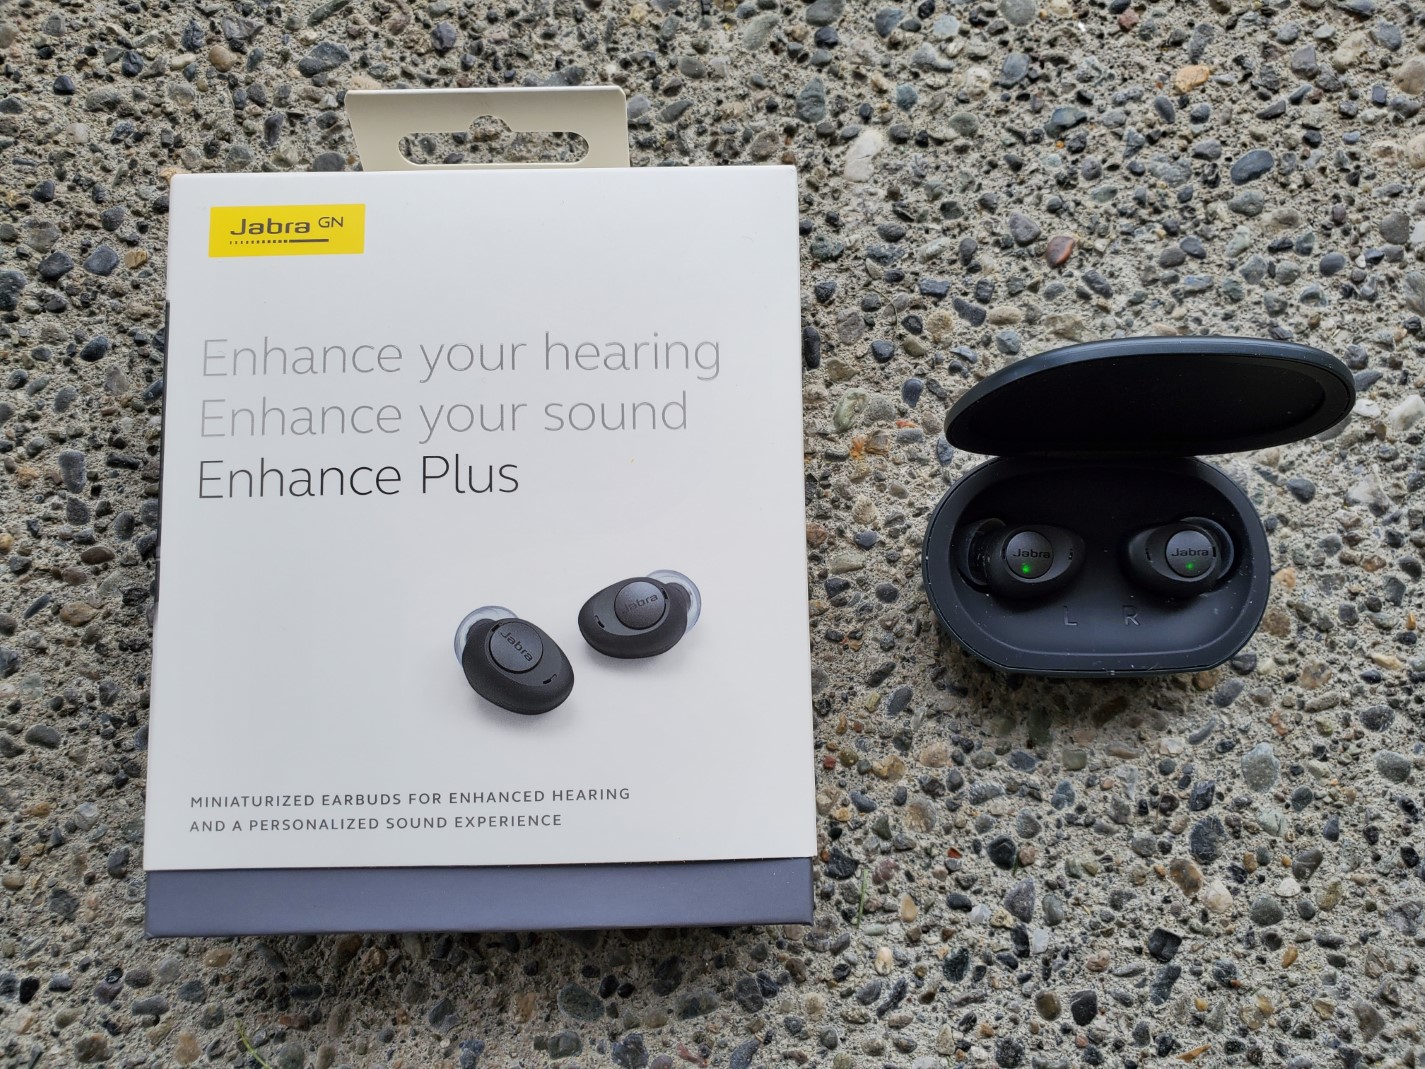 Jabra Enhance Plus review: Compact earbuds for people with mild